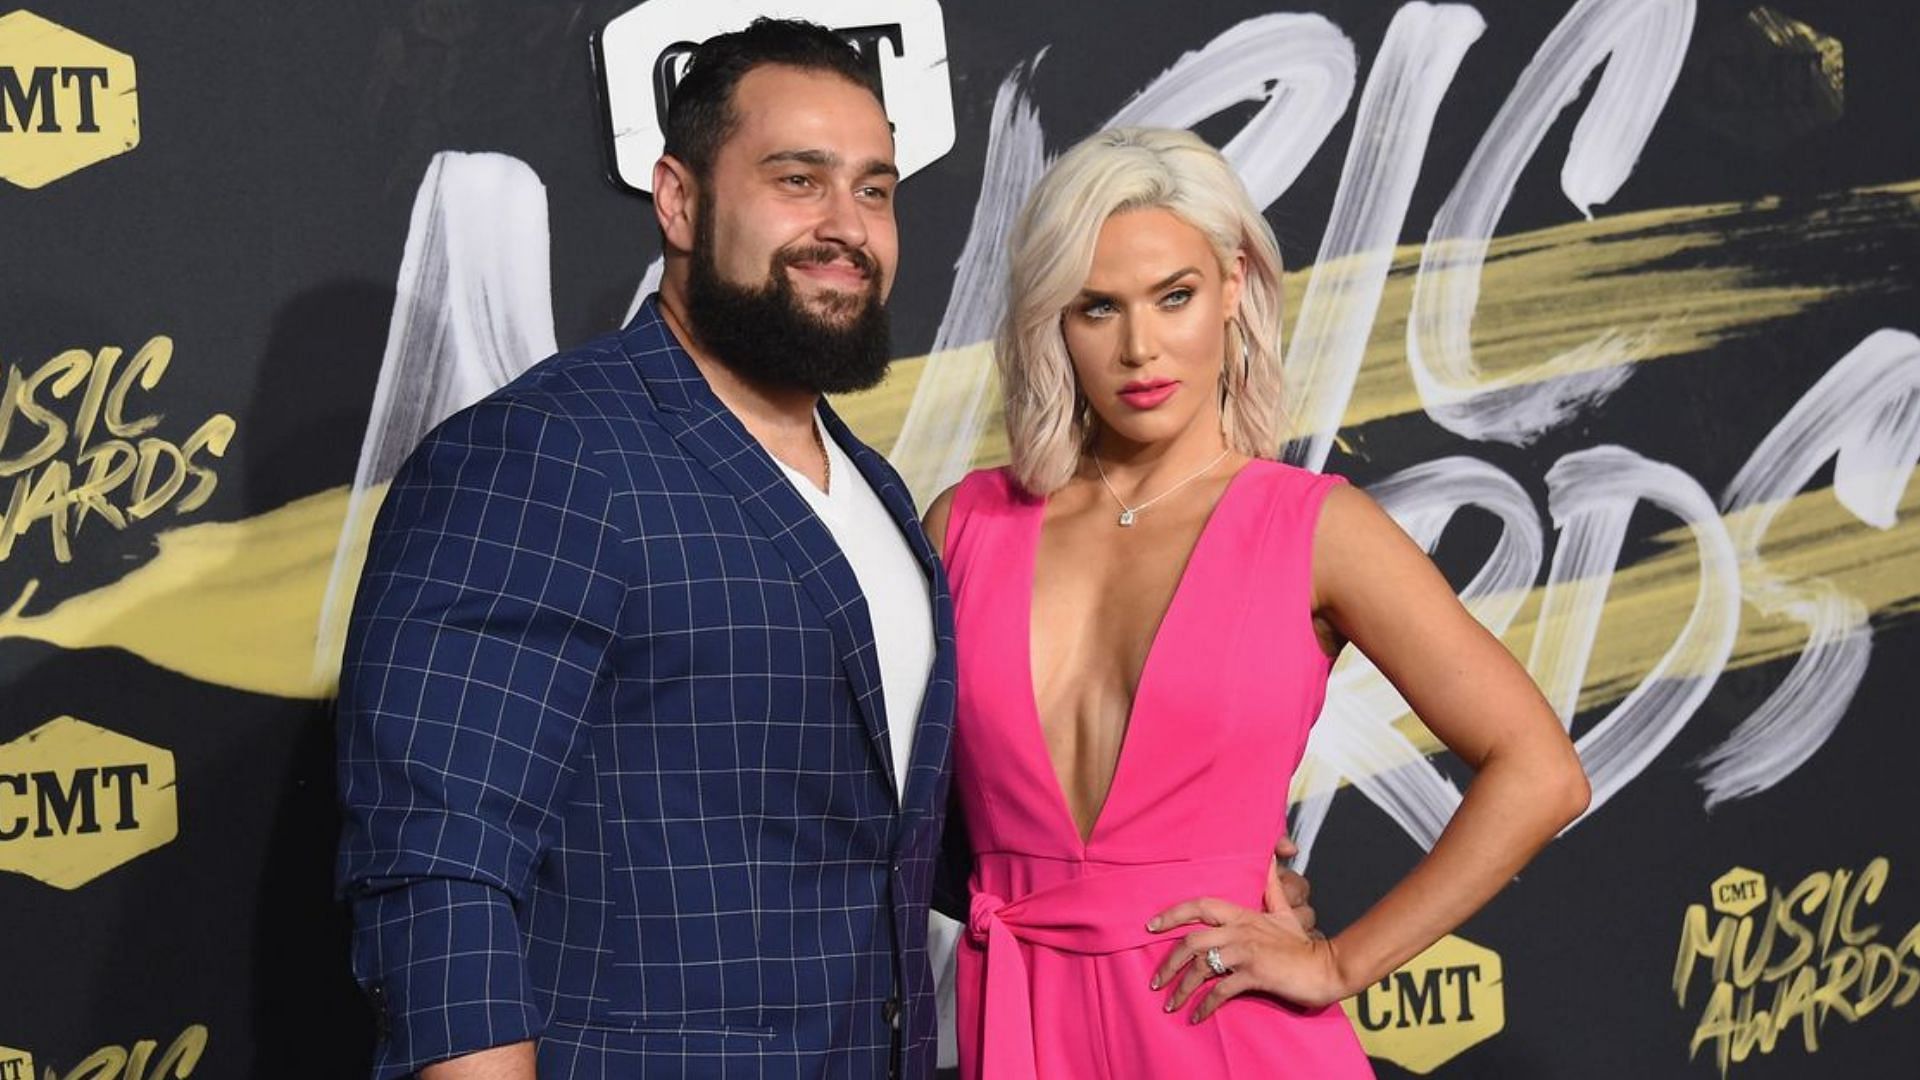 Will fans see Miro, CJ Perry (Lana), and this former WWE star reunite in AEW?